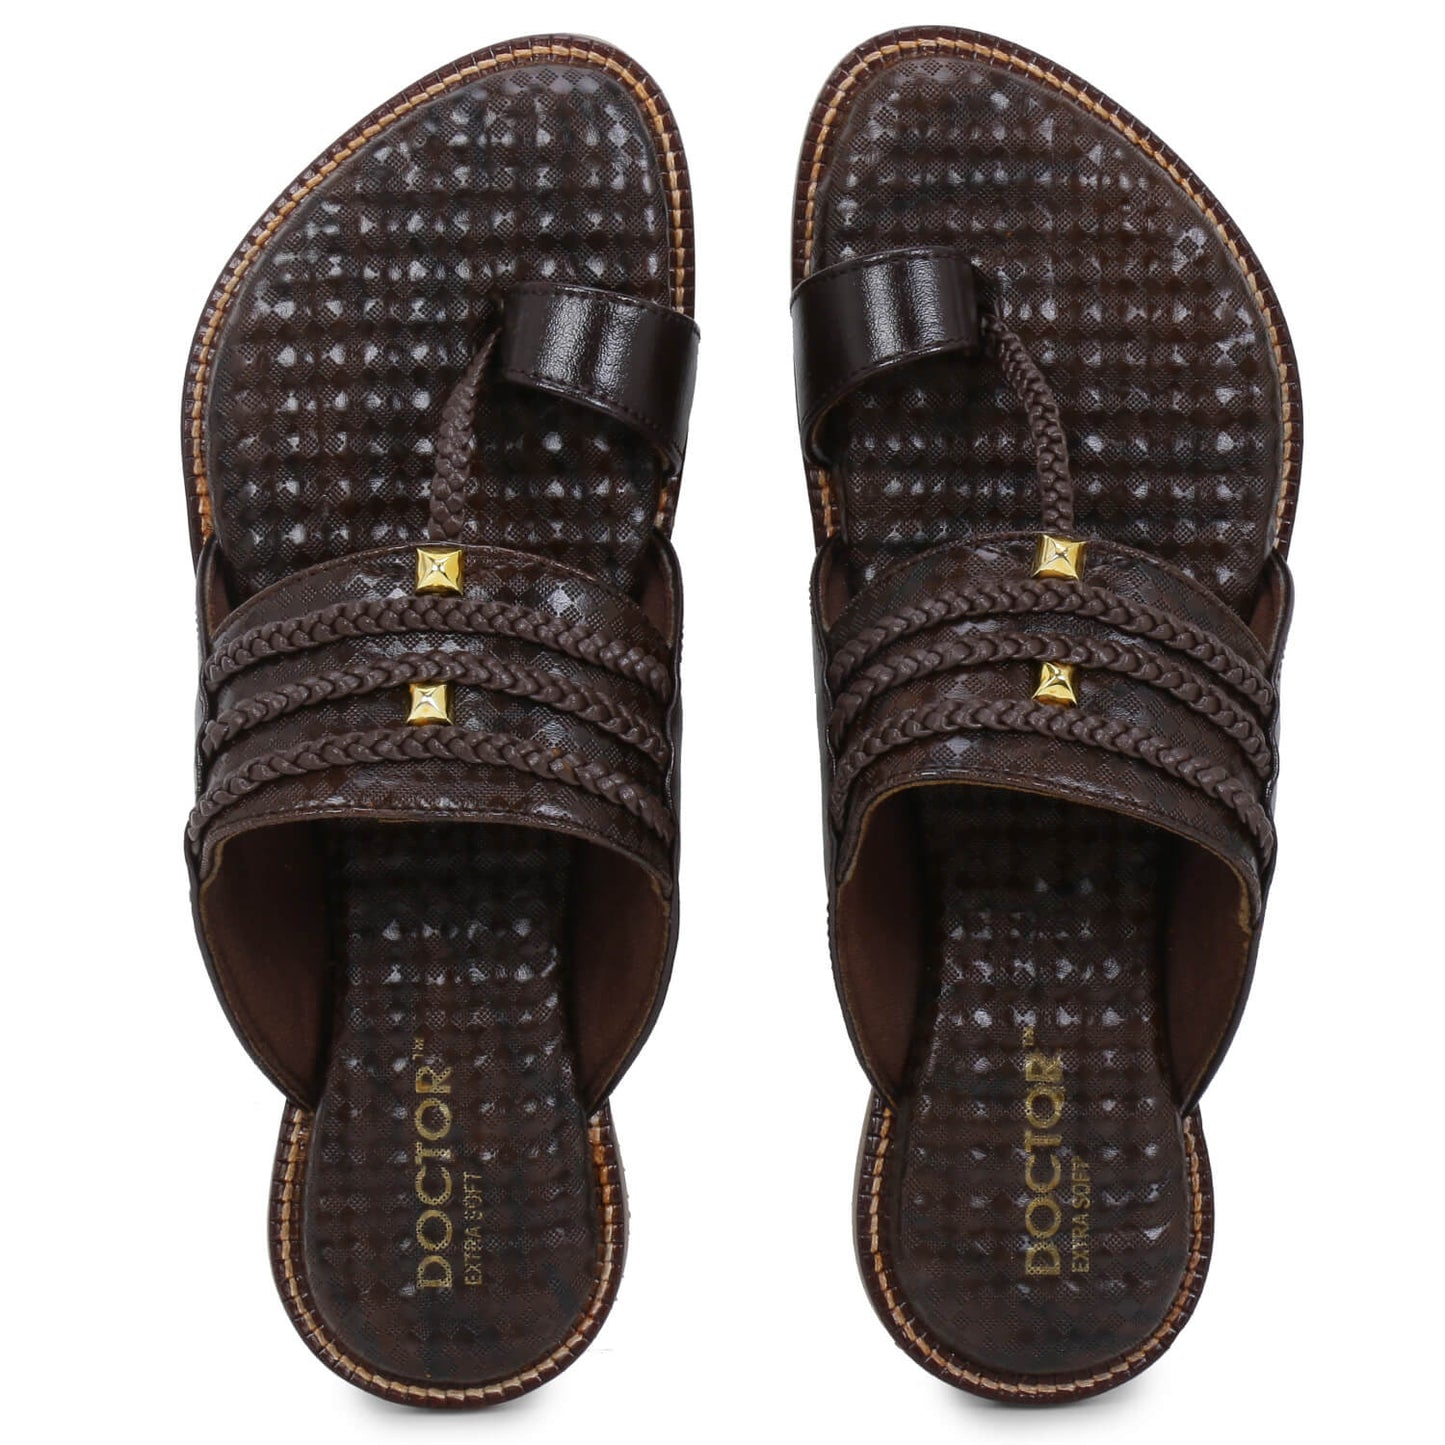 Doctor Extra Soft L-9, Ankle Pain, Knee Pain & Back Pain Casual Wear Stylish Chappal/Sandals for Men's-Gents-Boy's